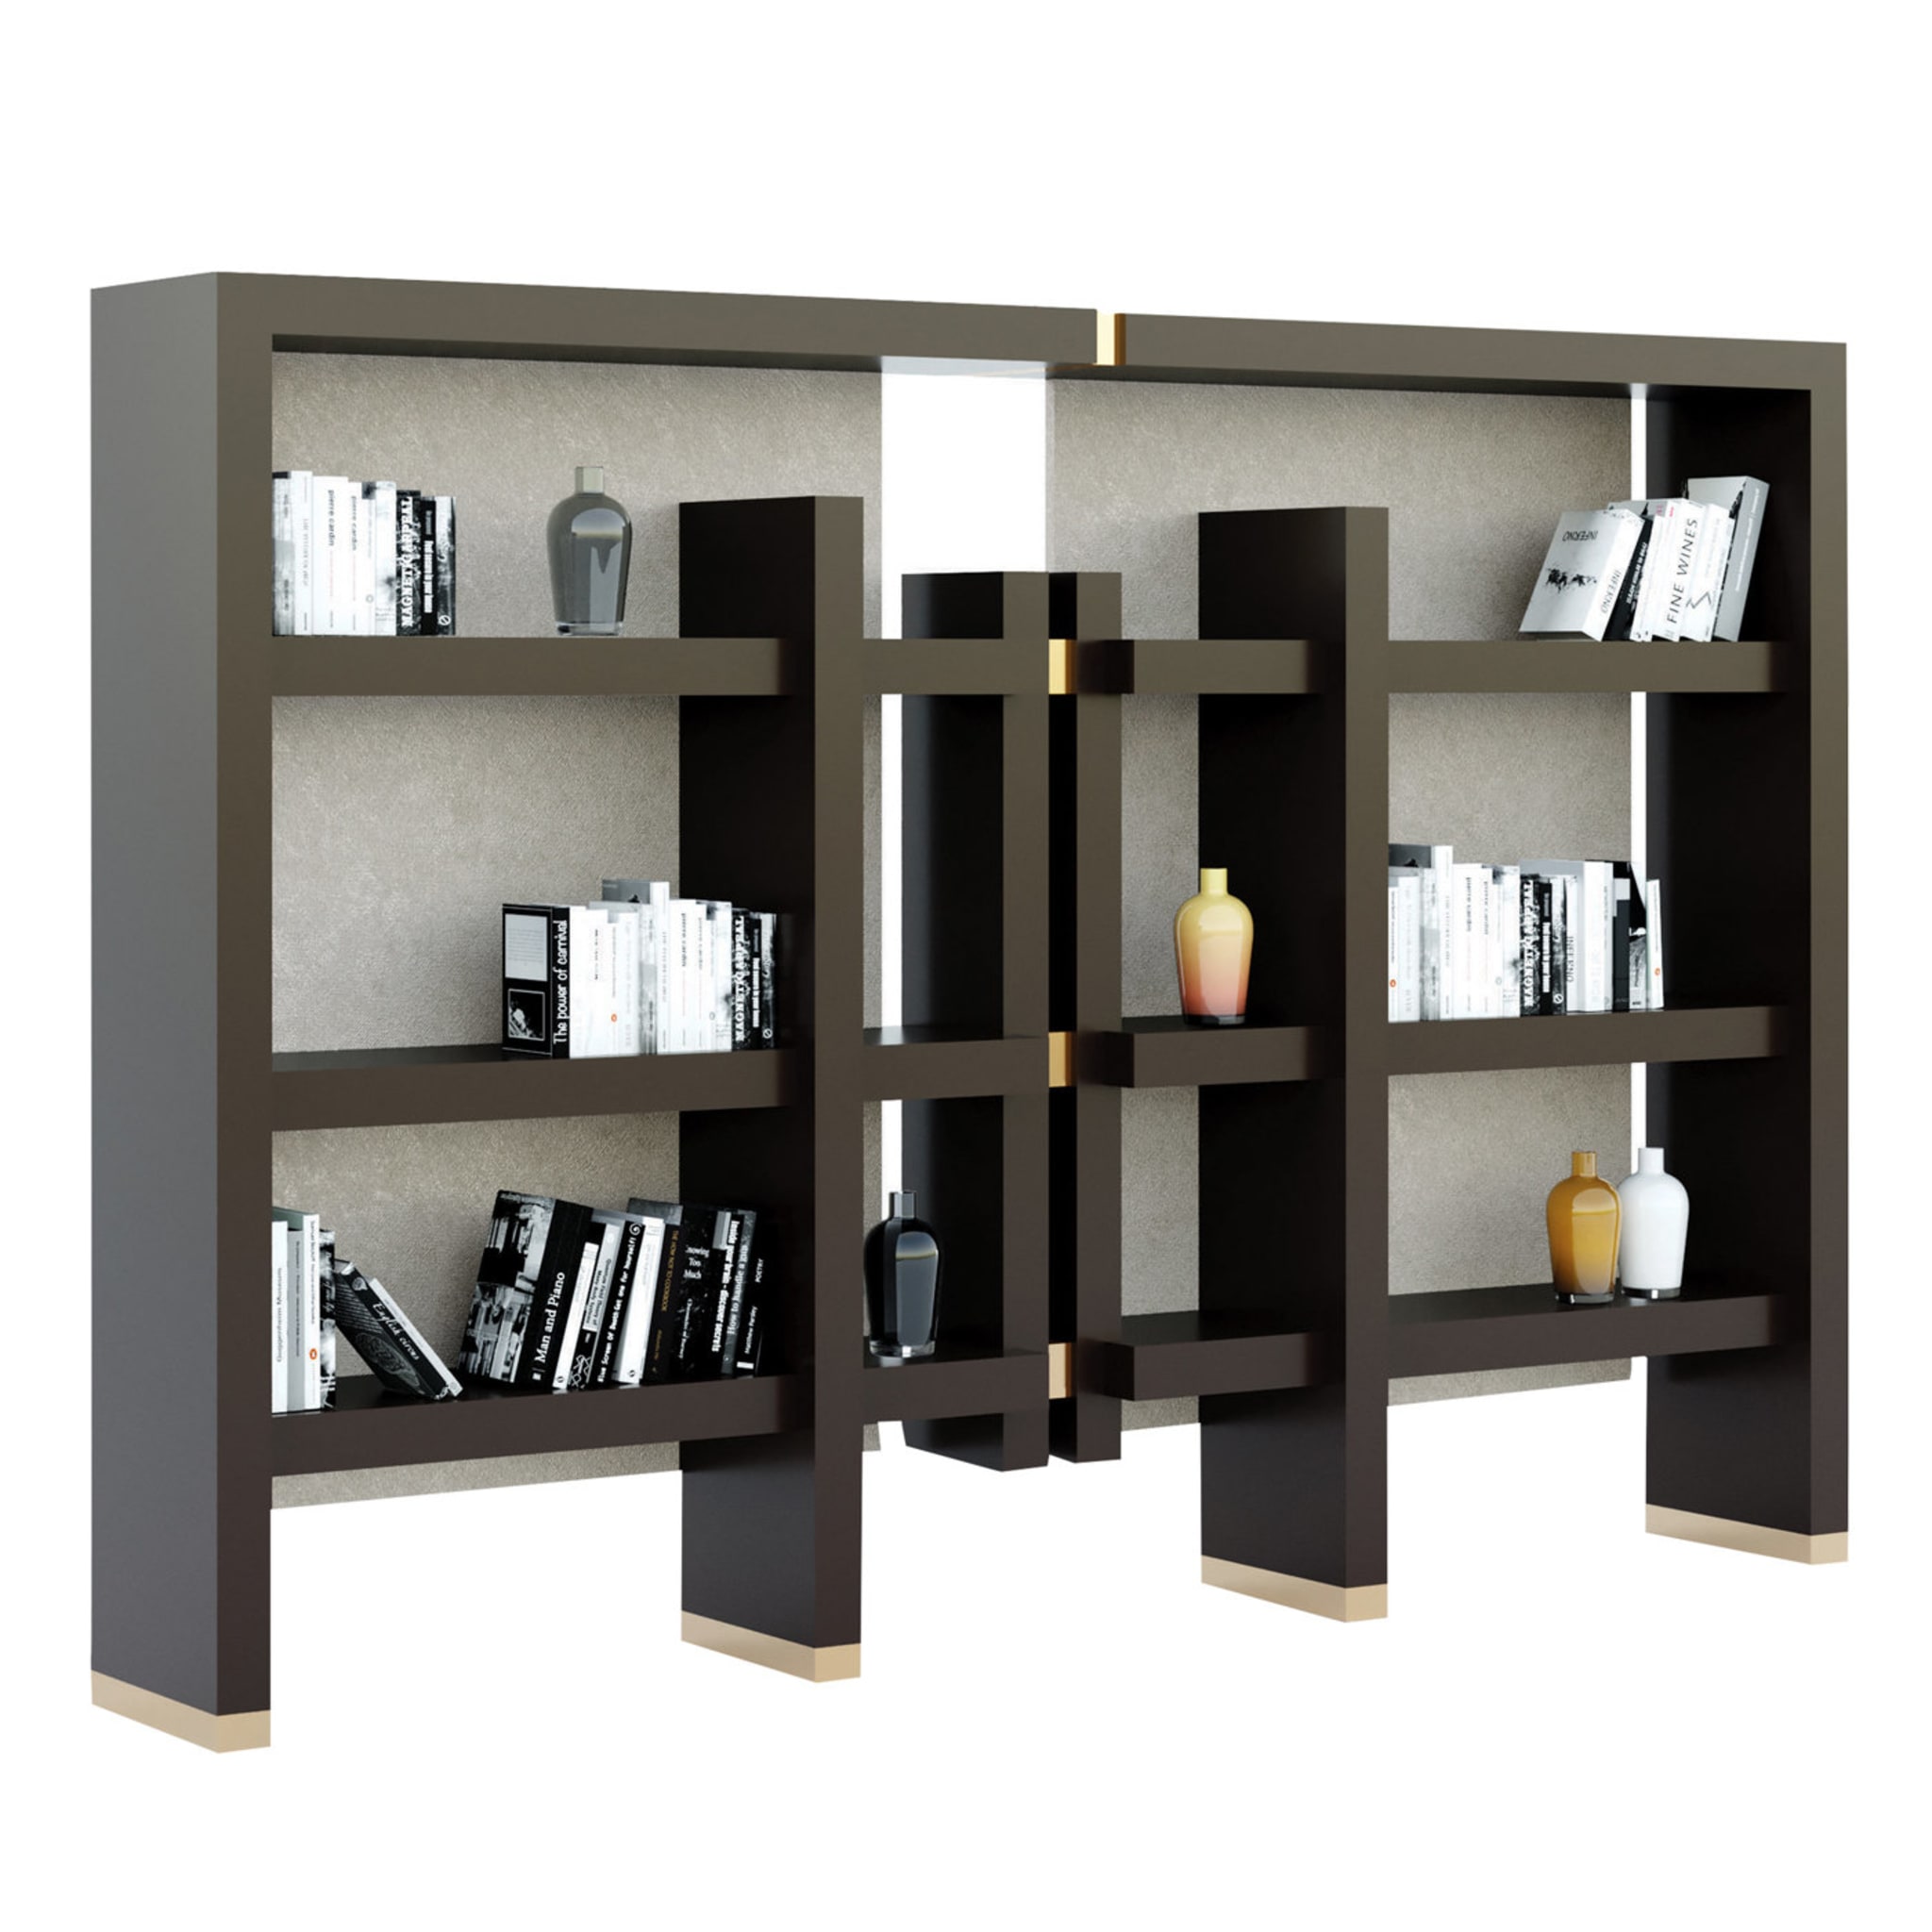 Ditch Bookcase by Giannella Ventura - Main view